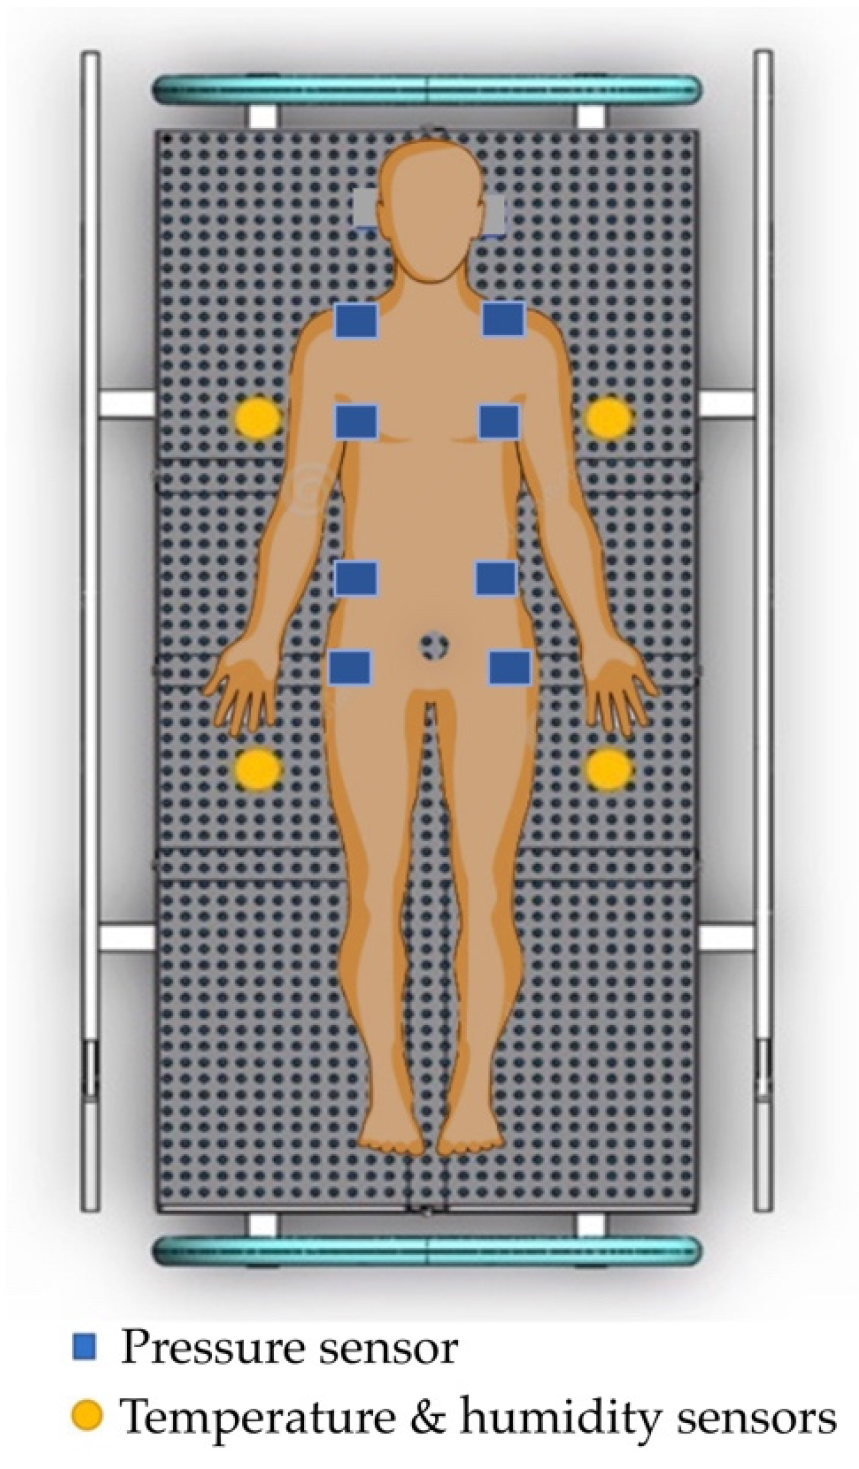 Diagnostics | Free Full-Text | Electronic Alert Signal for Early Detection  of Tissue Injuries in Patients: An Innovative Pressure Sensor Mattress